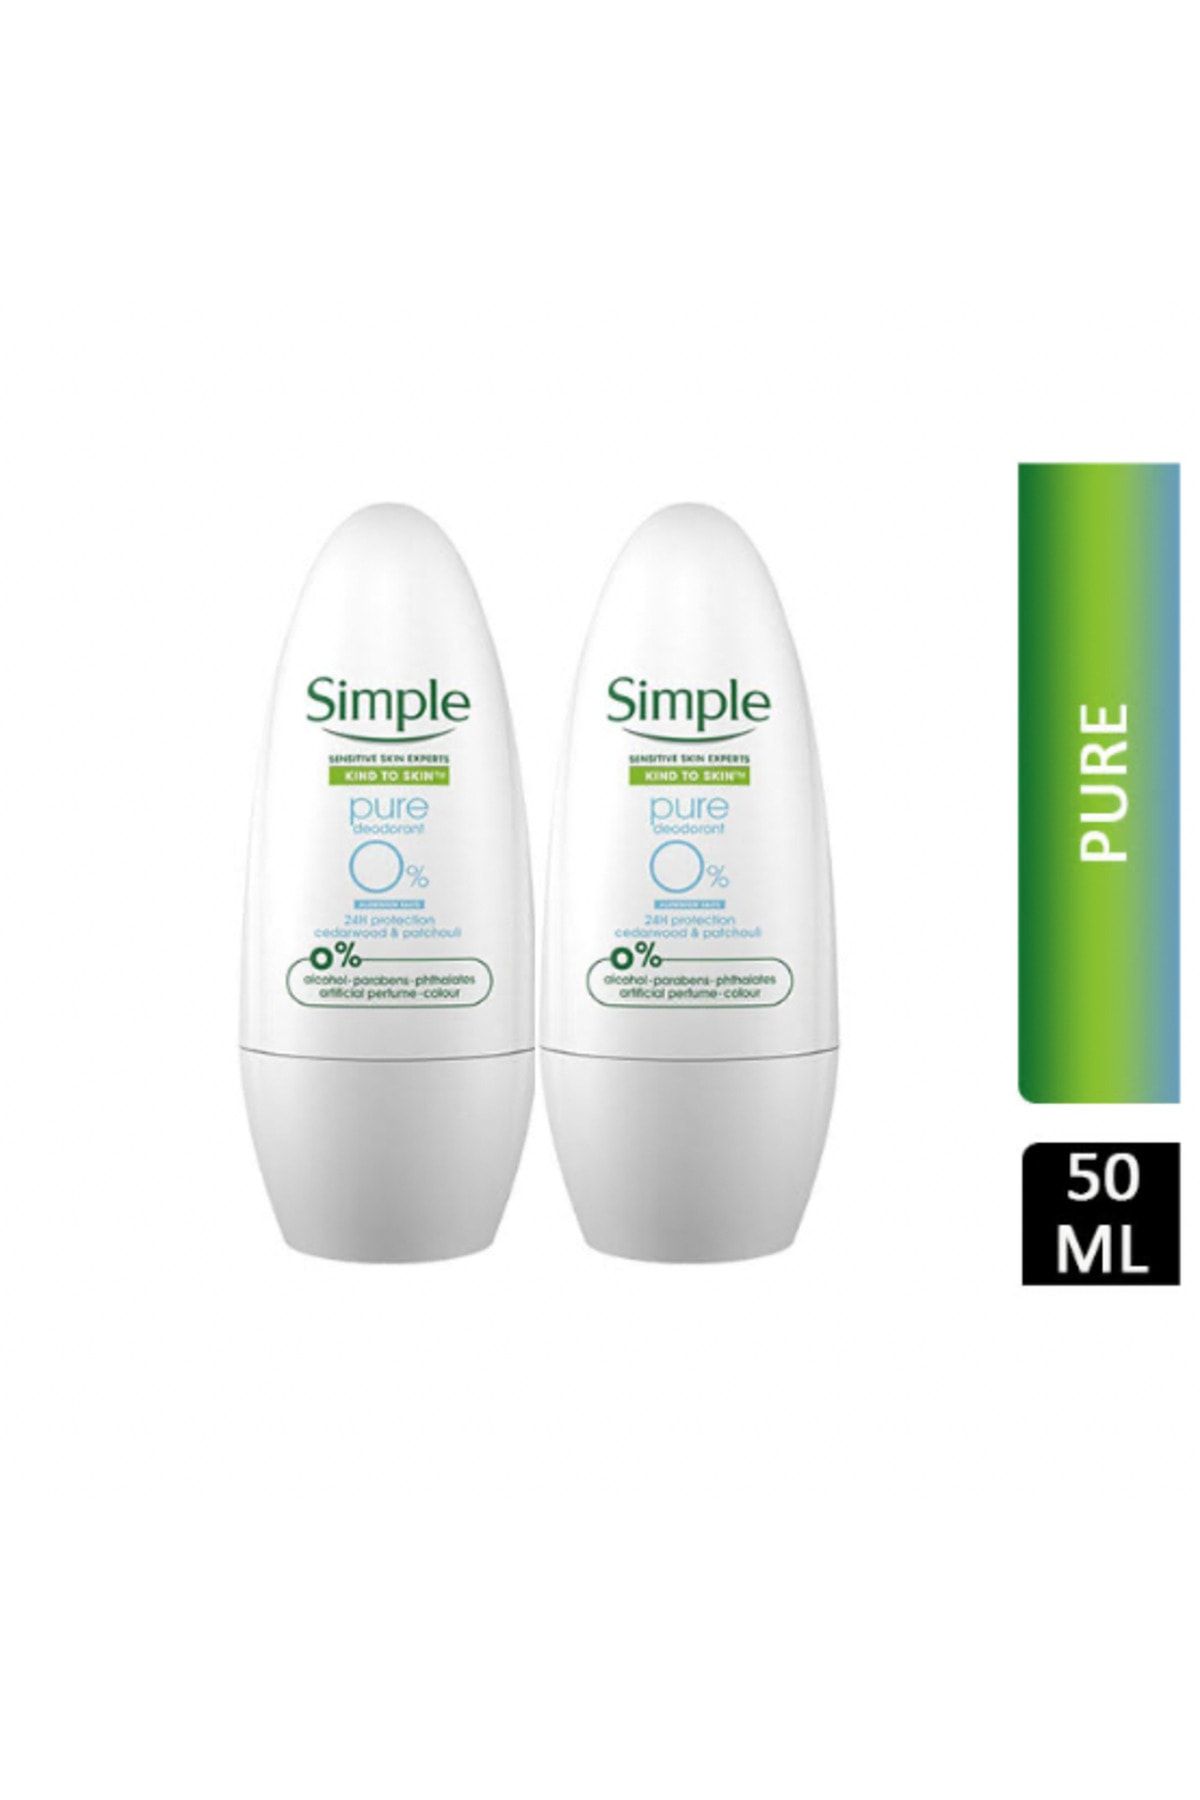 Simple Kind To Skin Pure Deodorant Roll On %0 ALCOHOL Sensitive 50 ml X 2 Adet